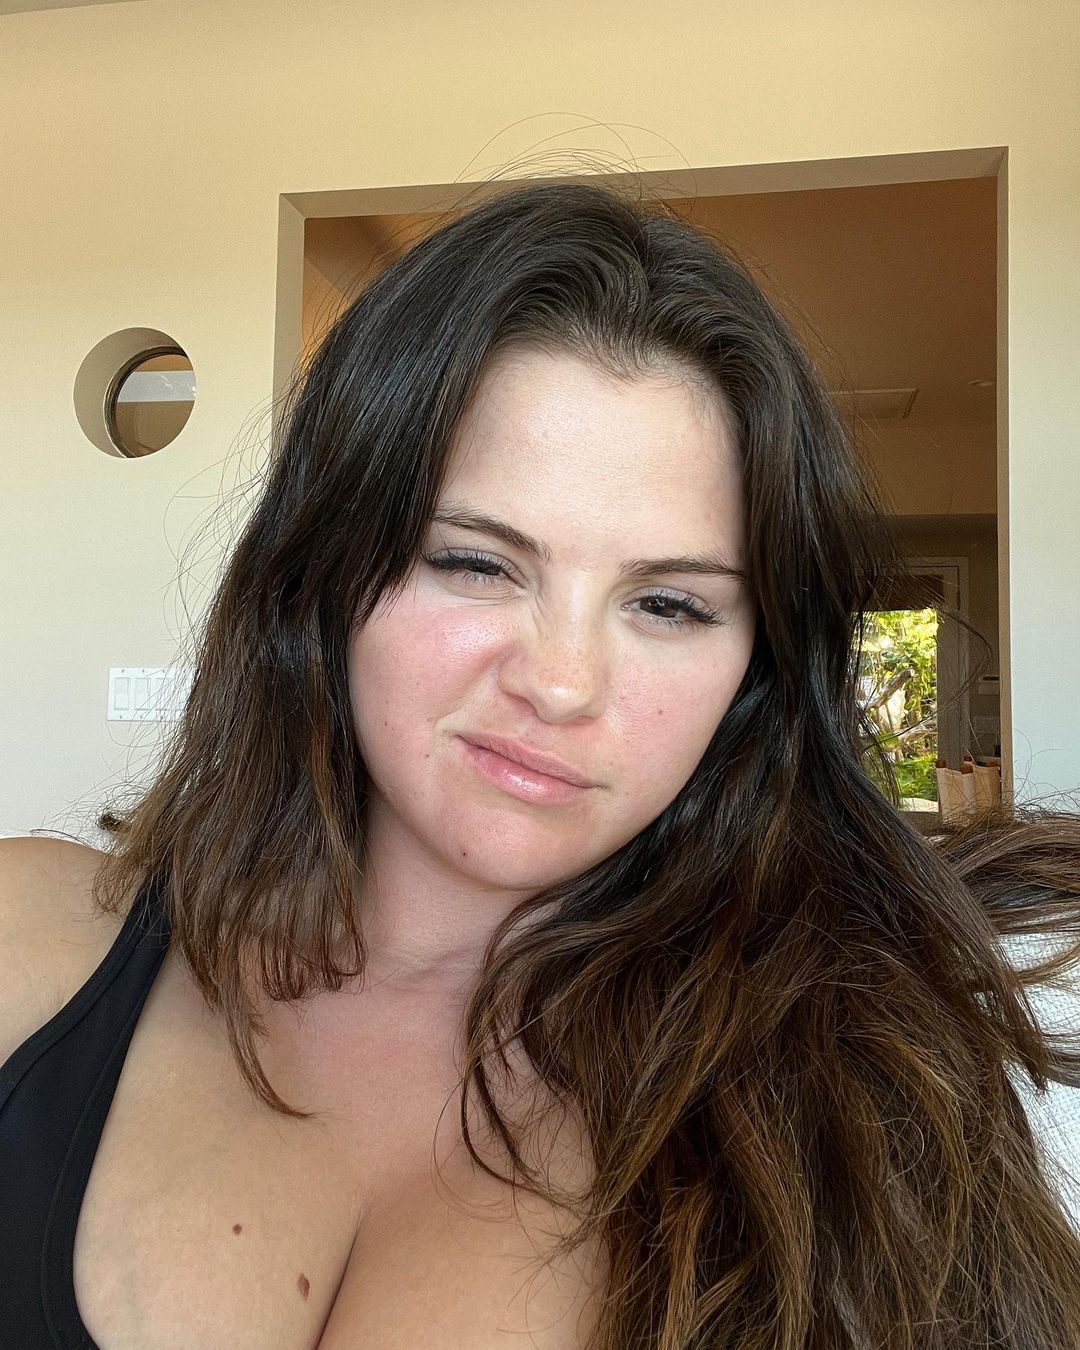 Selena Gomez Shares Makeup-Free Selfies with Nod to Miley Cyrus’ Song ‘Violet Chemistry’